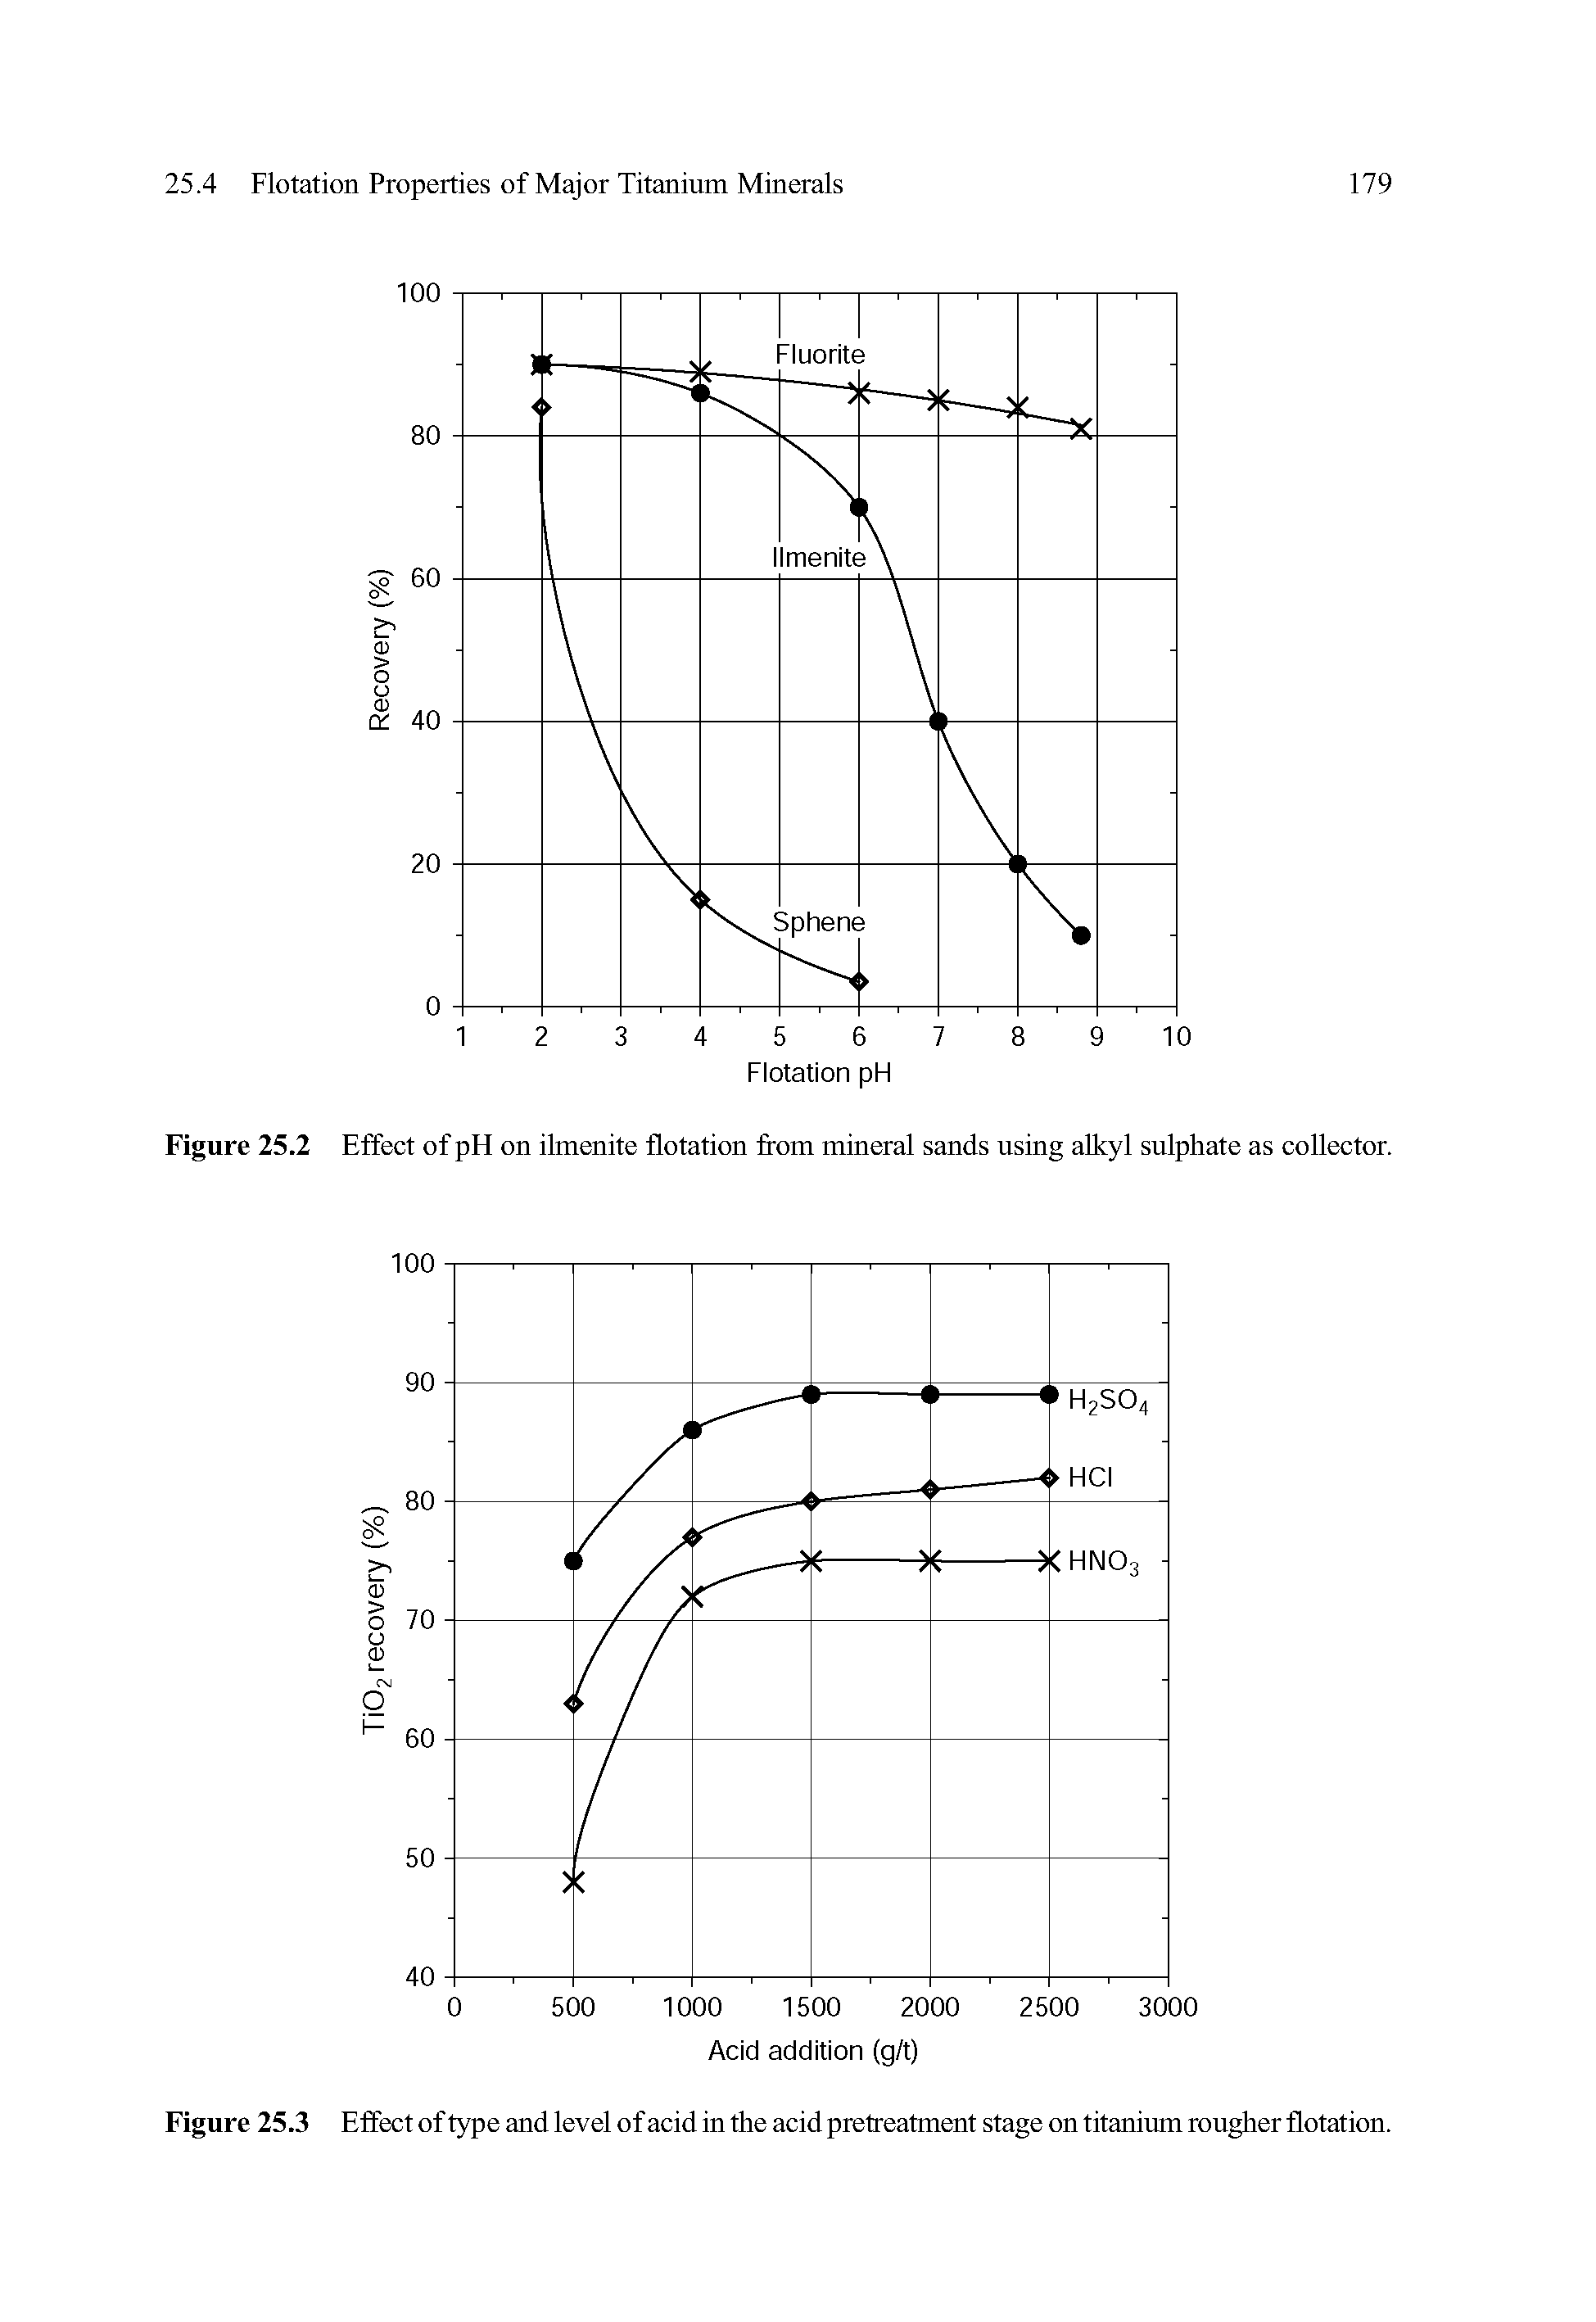 Figure 25.3 Effect of type and level of acid in the acid pretreatment stage on titanium rougher flotation.